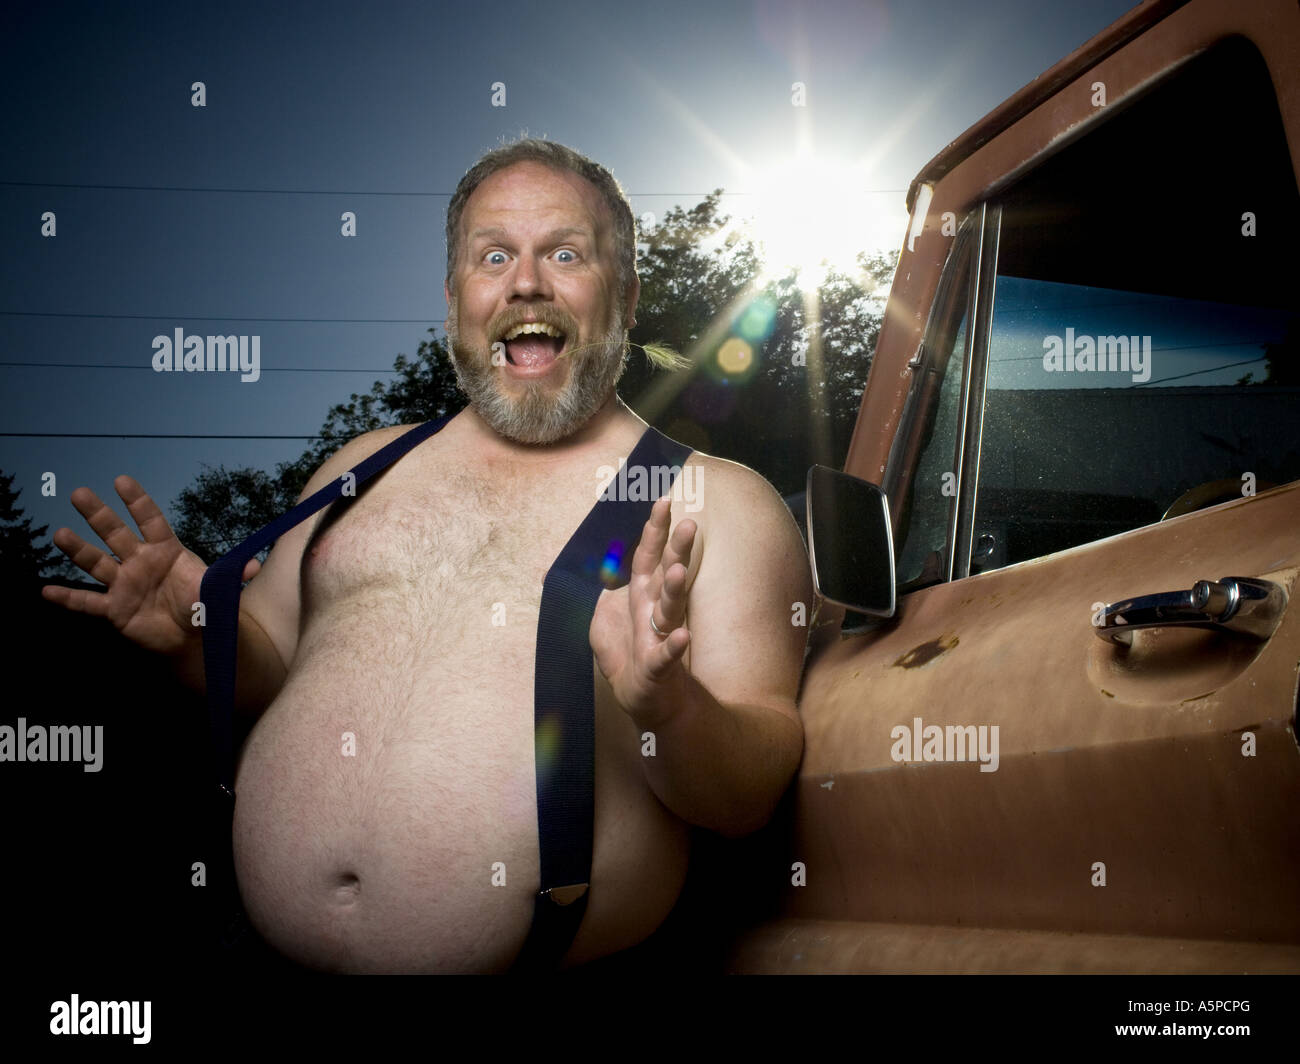 Overweight man with suspenders by truck Stock Photo